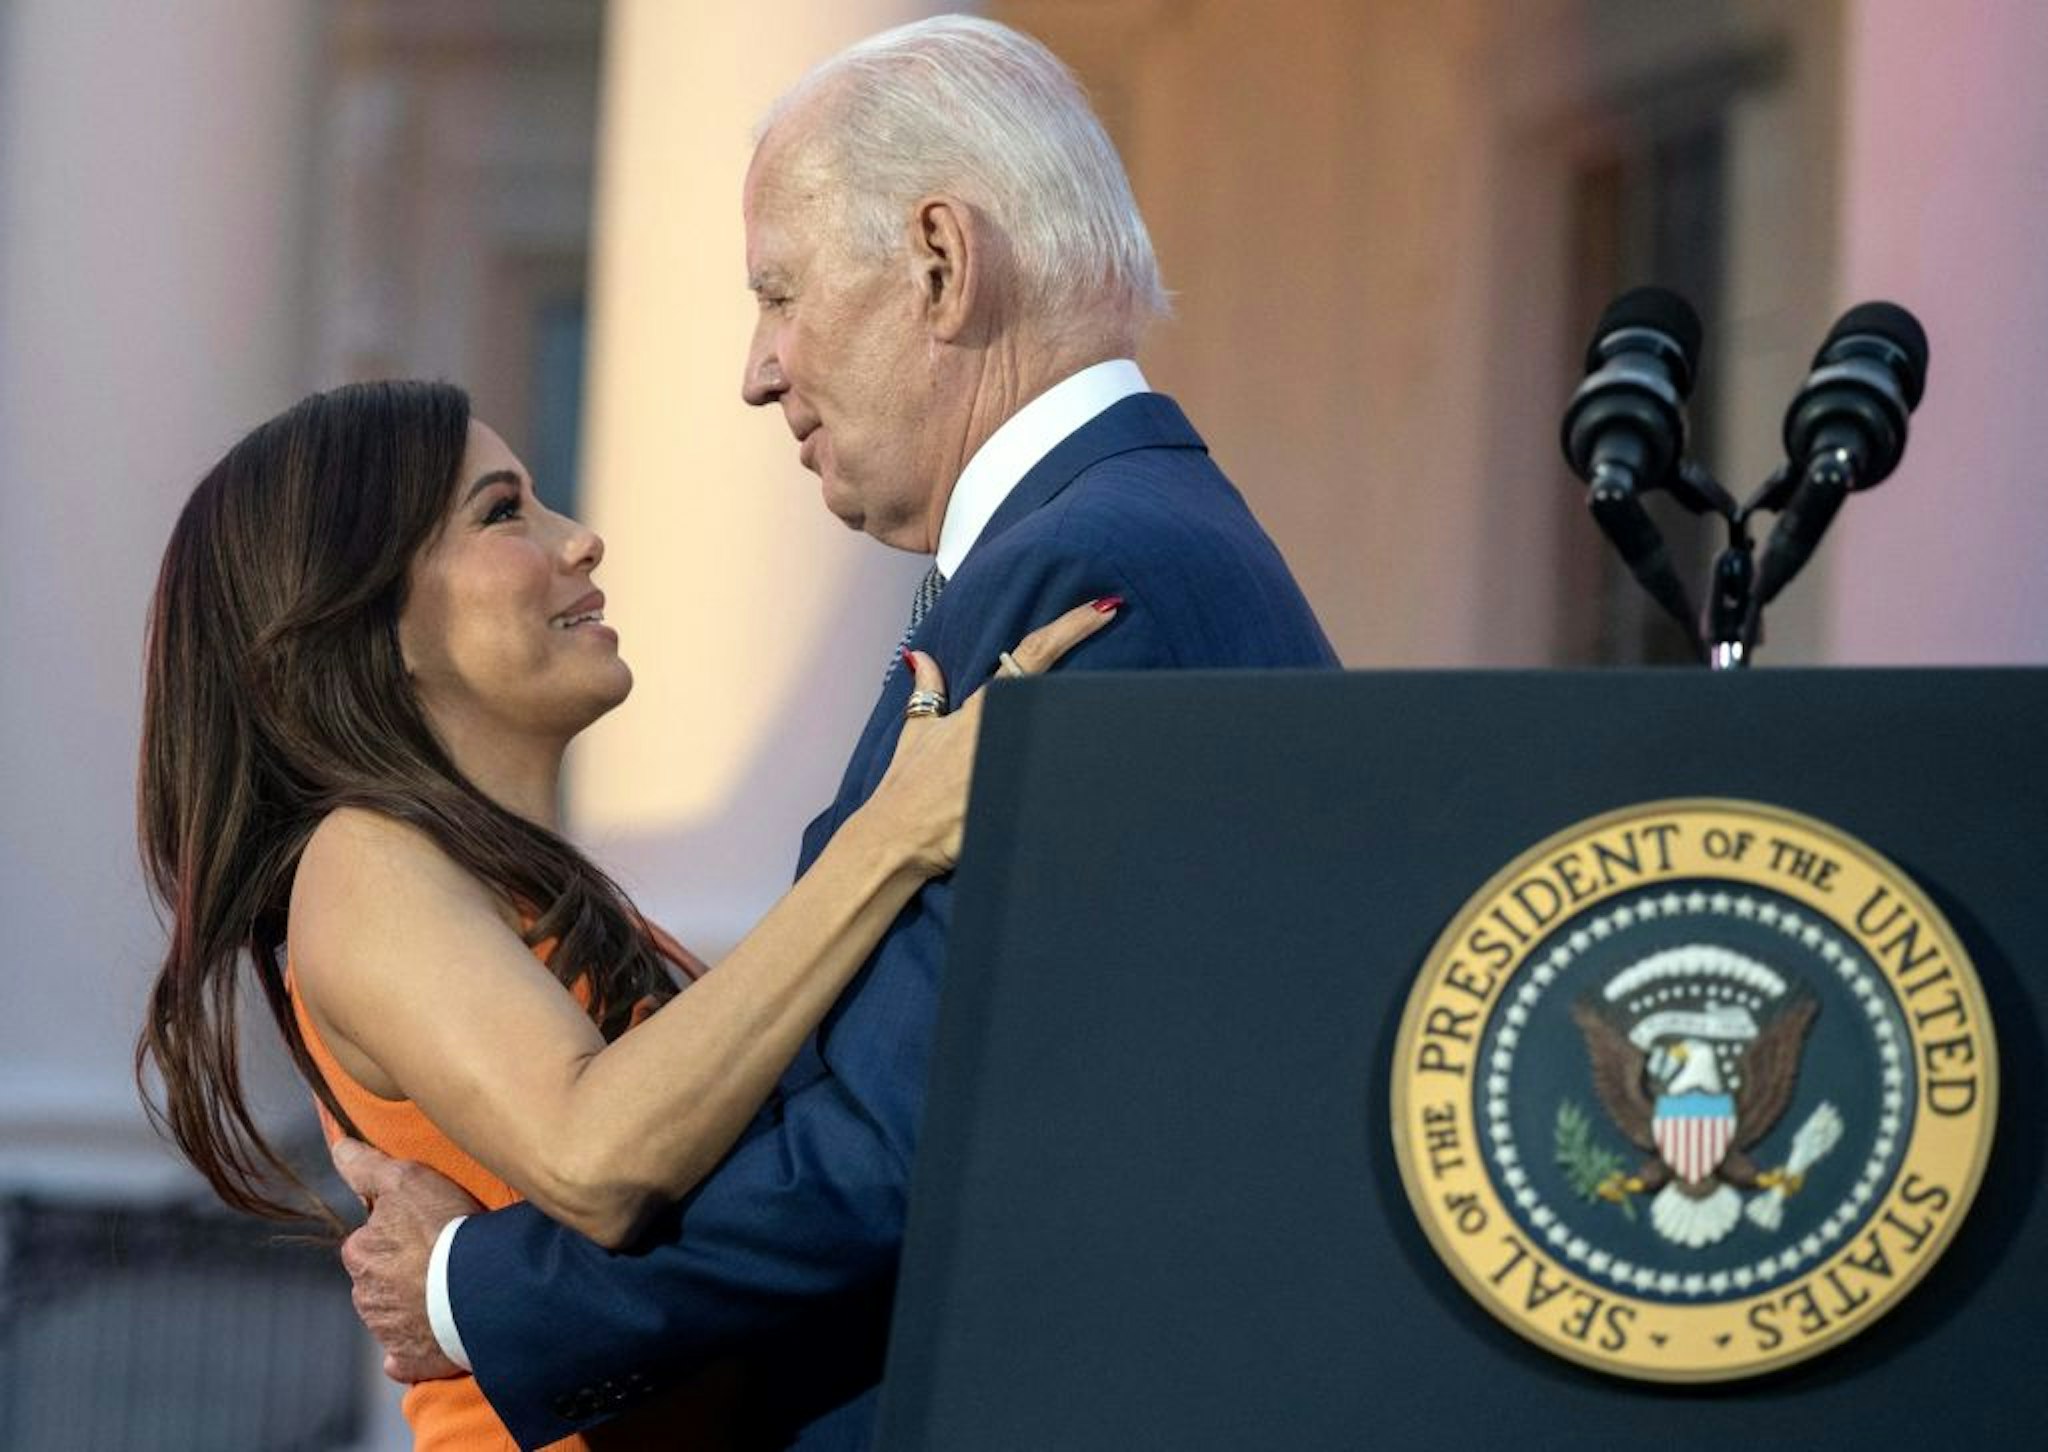 TOPSHOT - US actress and director Eva Longoria (L) greets US President Joe Biden during a screening of the film "Flamin' Hot" on the South Lawn of the White House in Washington, DC, June 15, 2023. (Photo by ANDREW CABALLERO-REYNOLDS / AFP) (Photo by ANDREW CABALLERO-REYNOLDS/AFP via Getty Images)